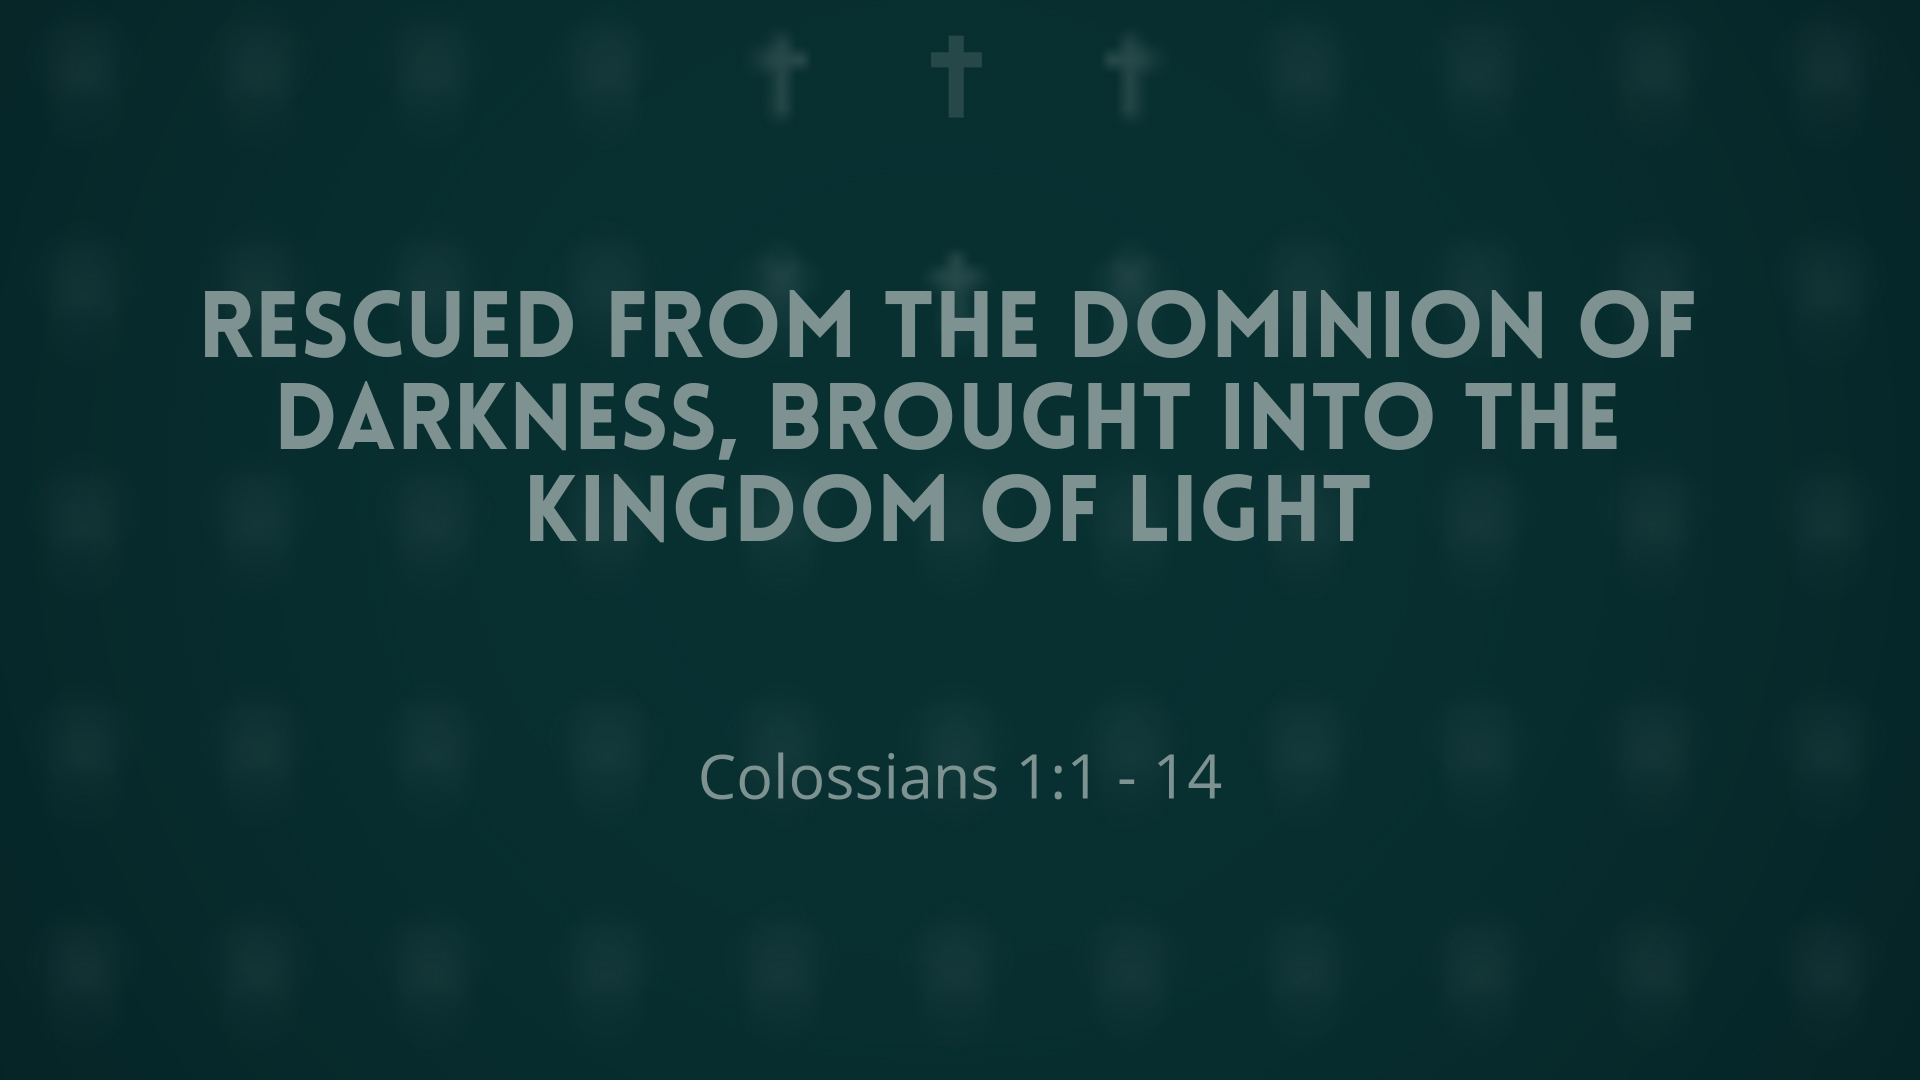 Jun 05, 2022 - Rescued from the Dominion of Darkness, Brought into the Kingdom of Light (Video) Colossians 1:1 - 14